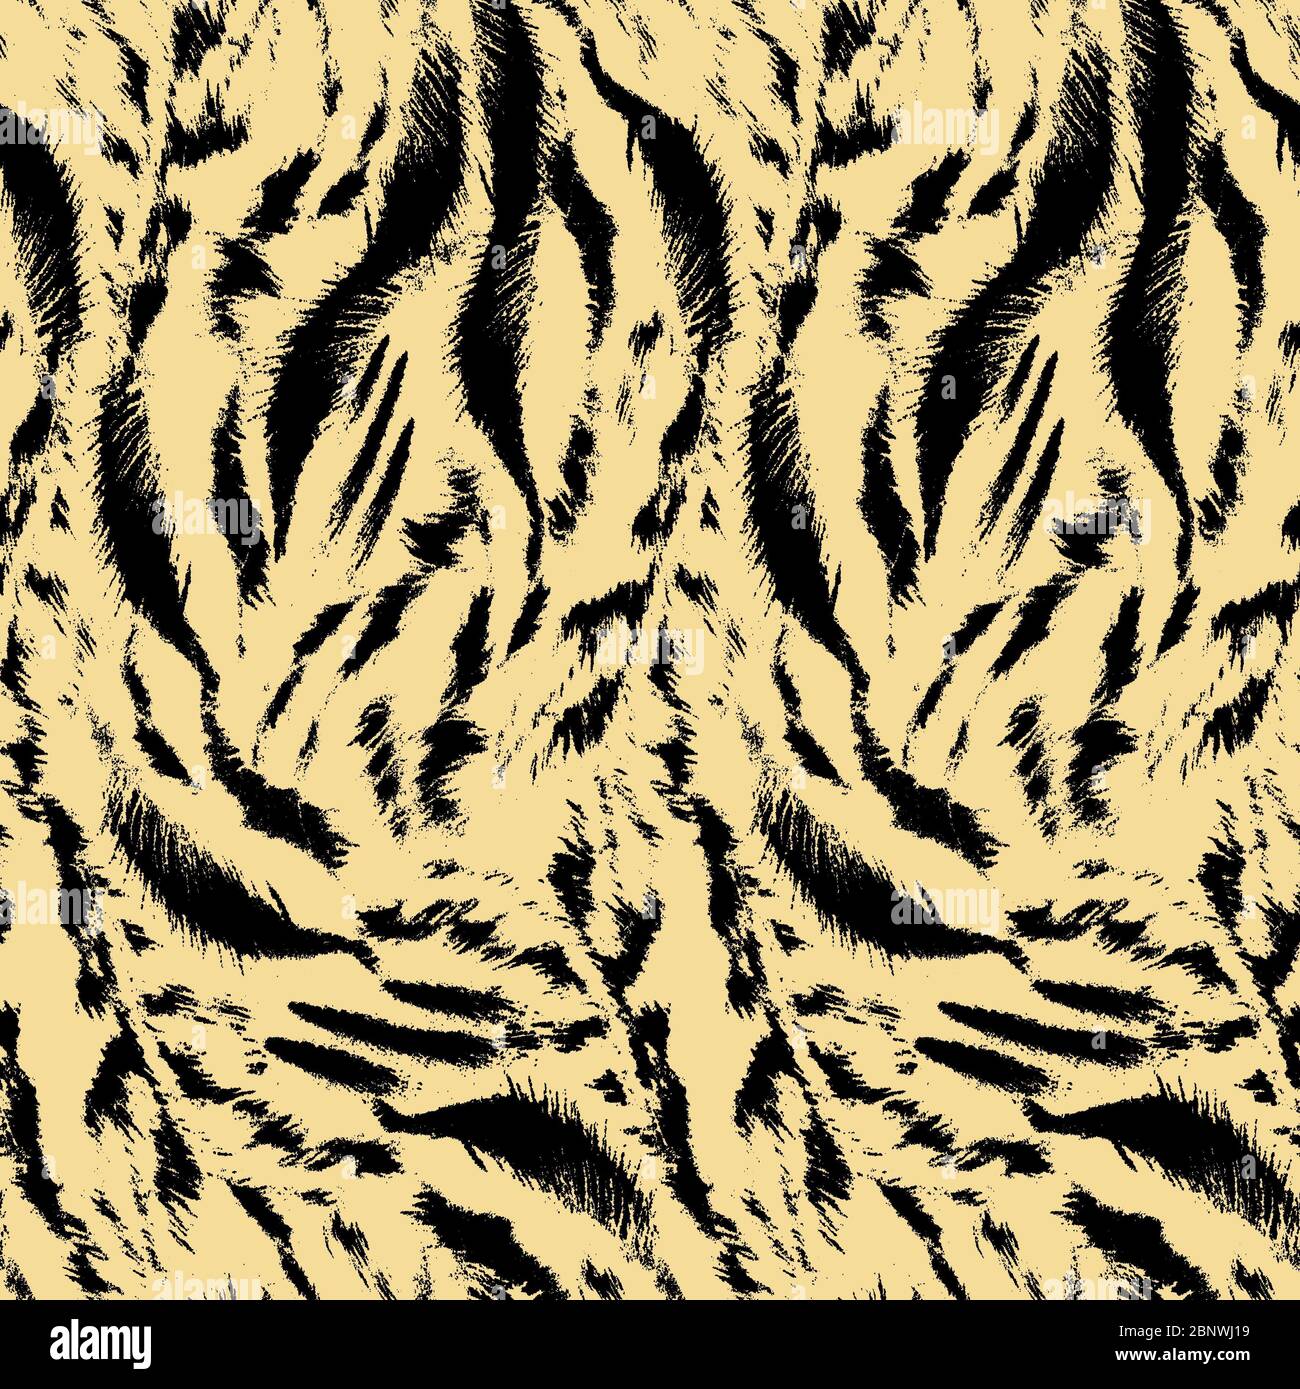 Tiger skin pattern, Fashionable seamless print. Fashion and stylish light background. Ready for textile prints. Stock Photo